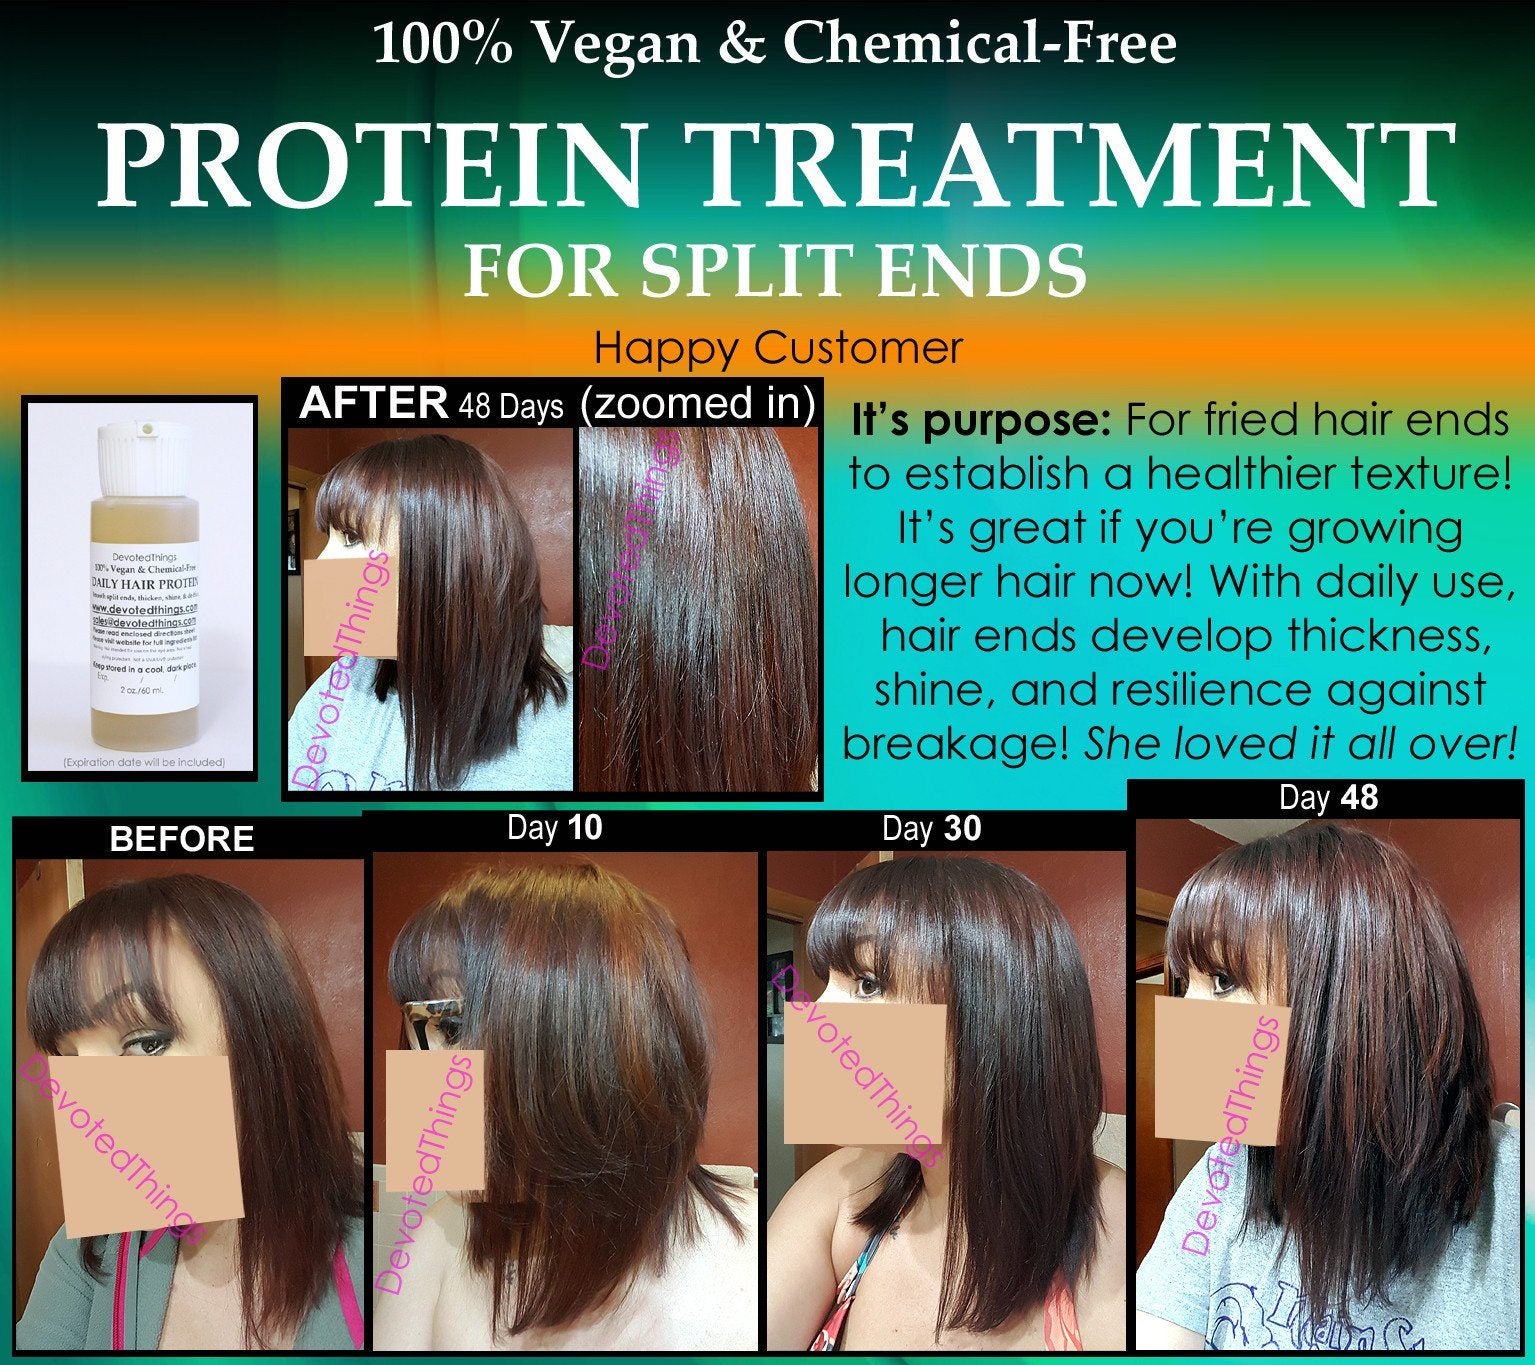 Top 100 image protein treatment for natural hair - Thptnganamst.edu.vn